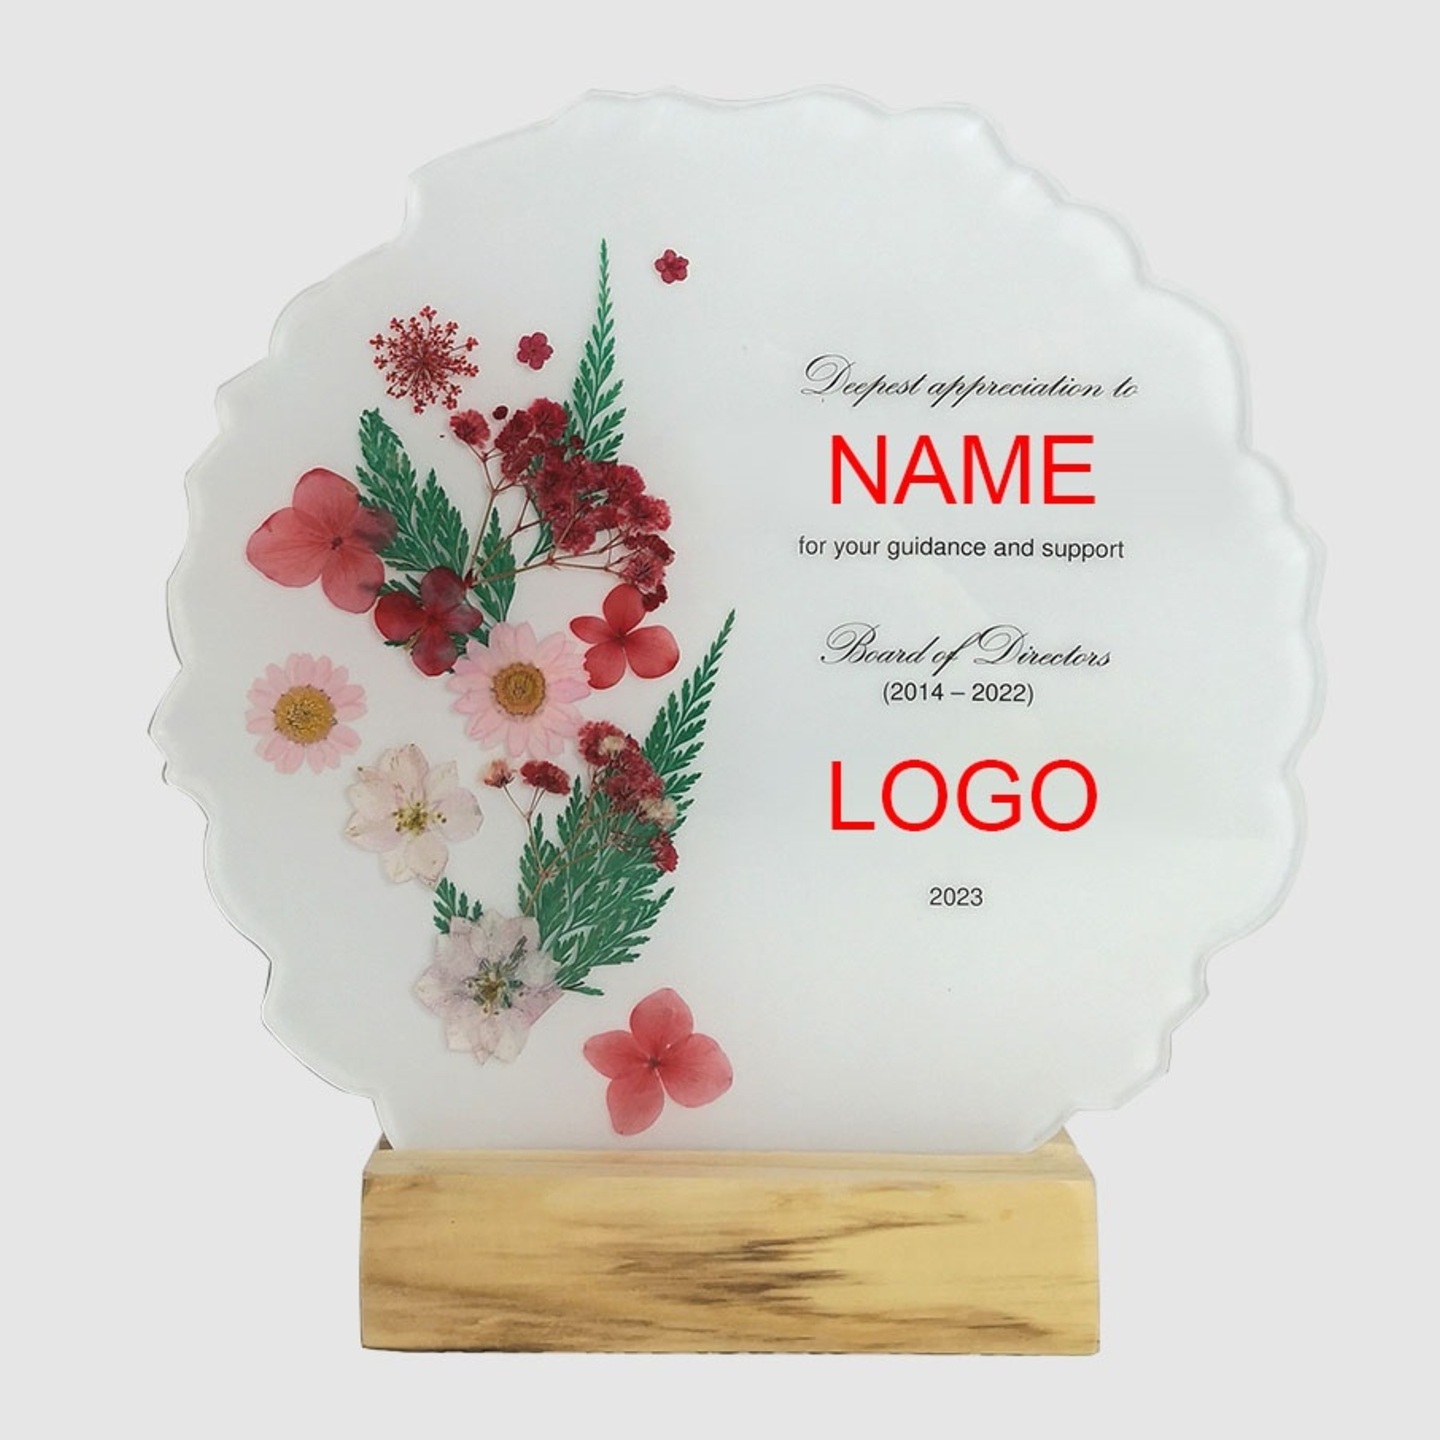 Customised Award Plaque with real flowers & leaves on wood base  Custom wording & logo  Free design proposal